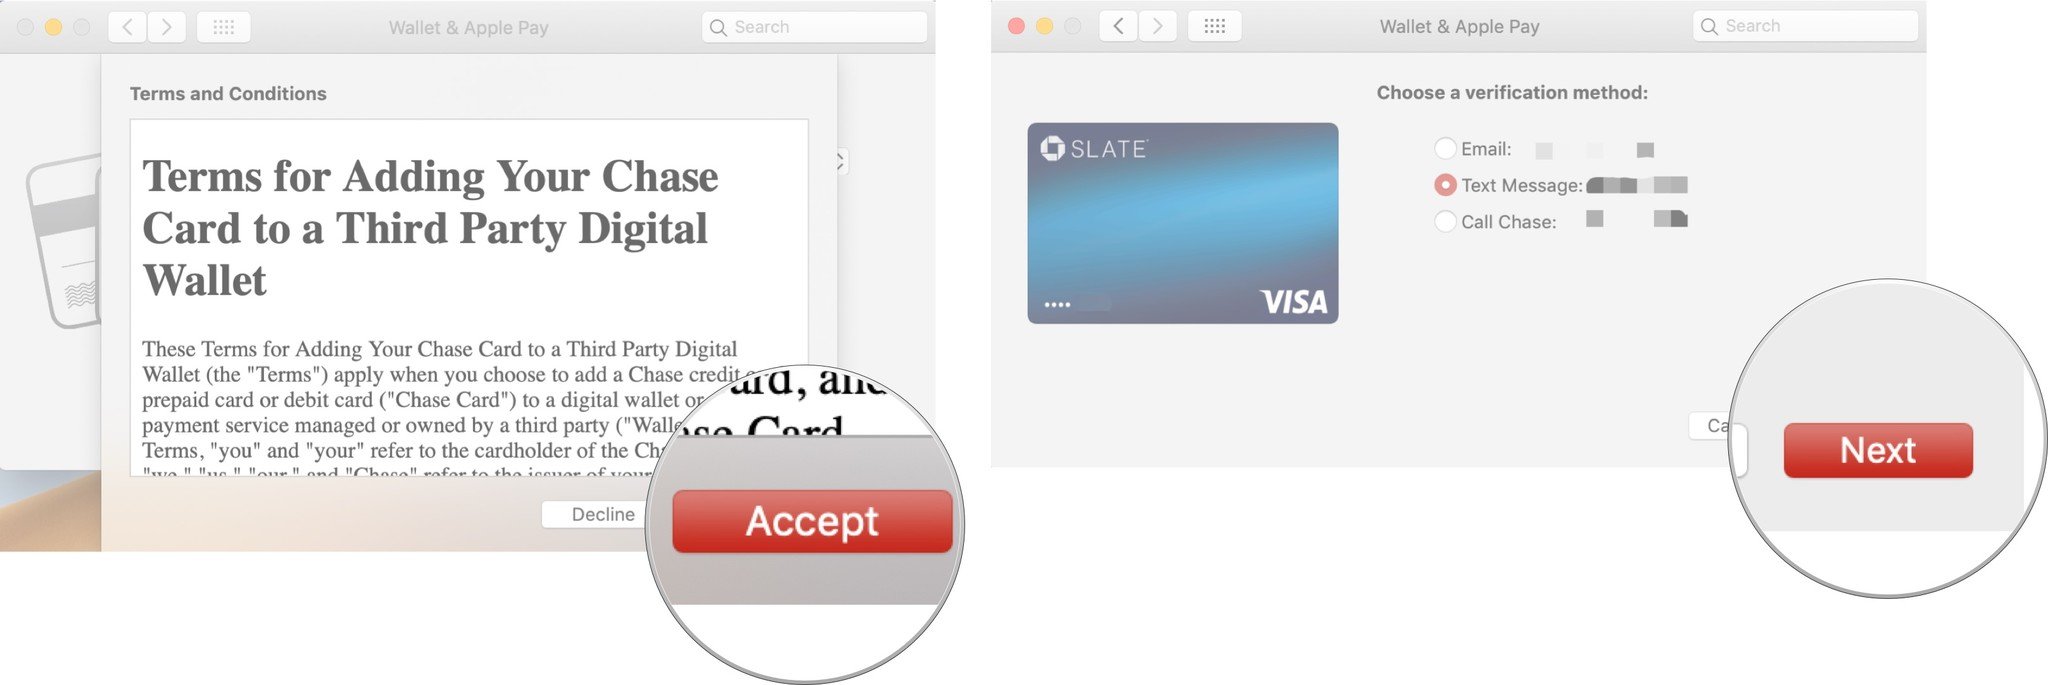 Setting up Apple Pay on Mac showing the steps to Accept the terms and conditions and select the method of verification